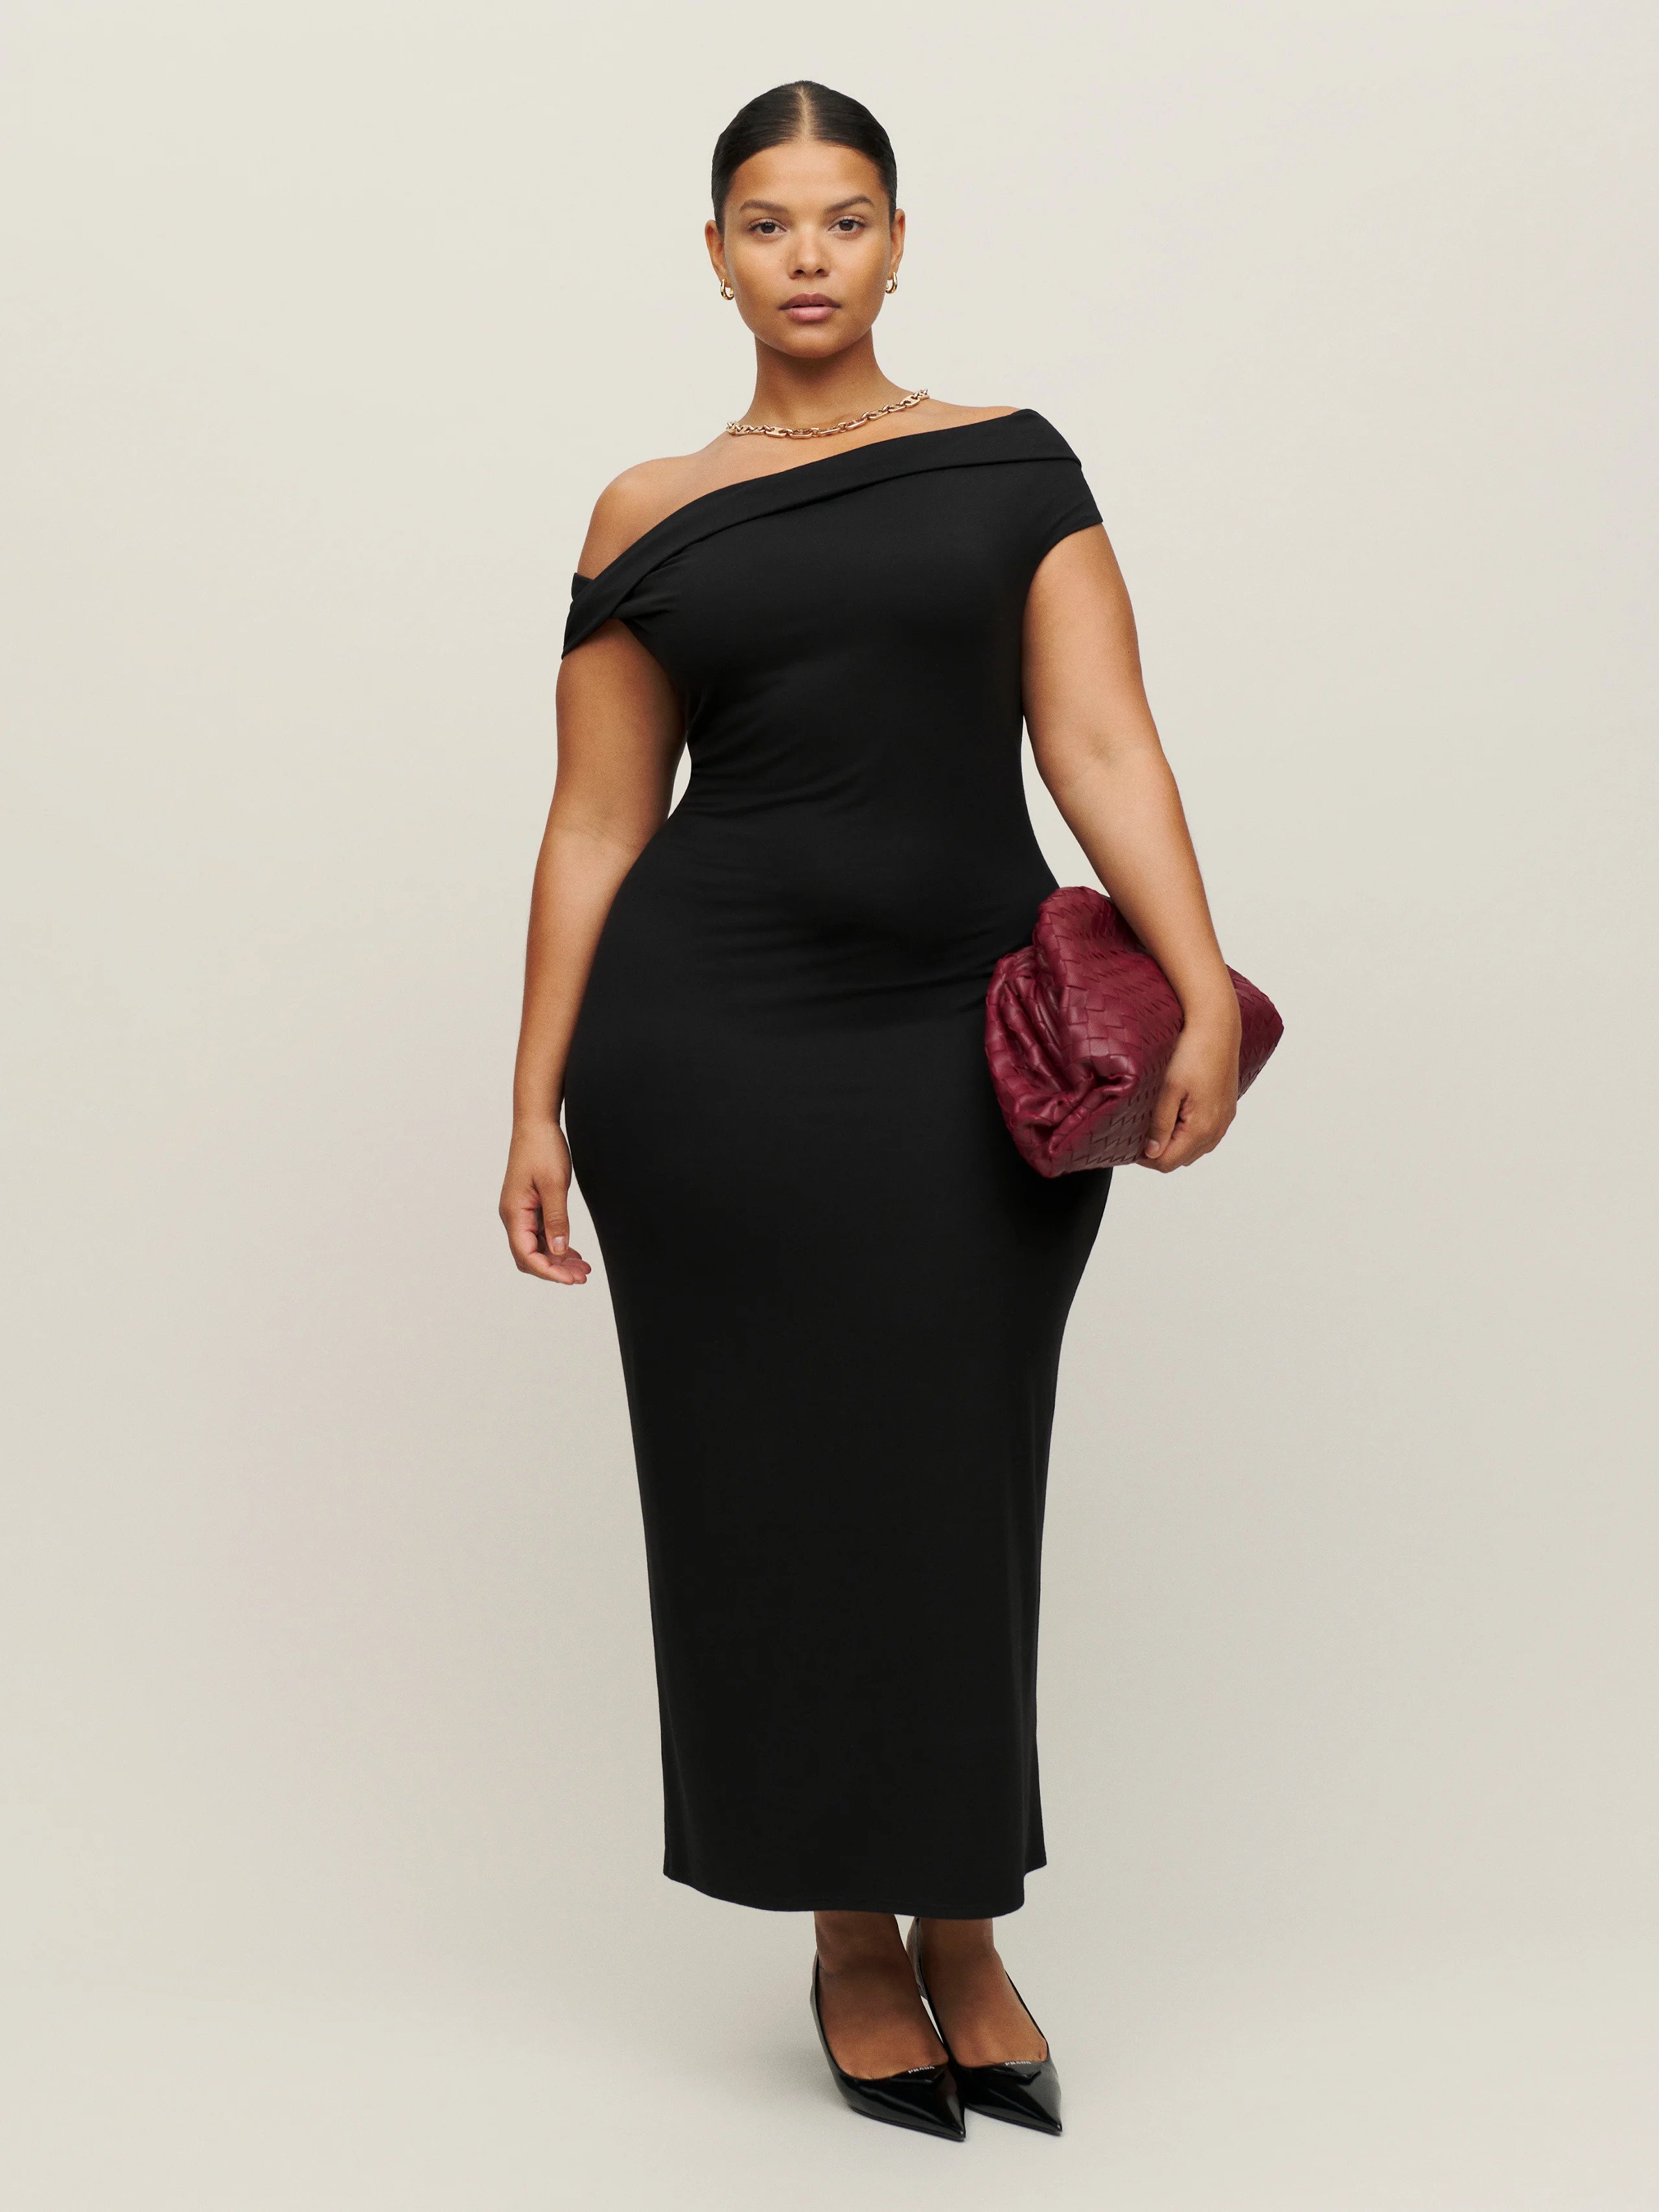 Can You Wear Black to a Wedding? 21 Dresses to Try | Who What Wear UK